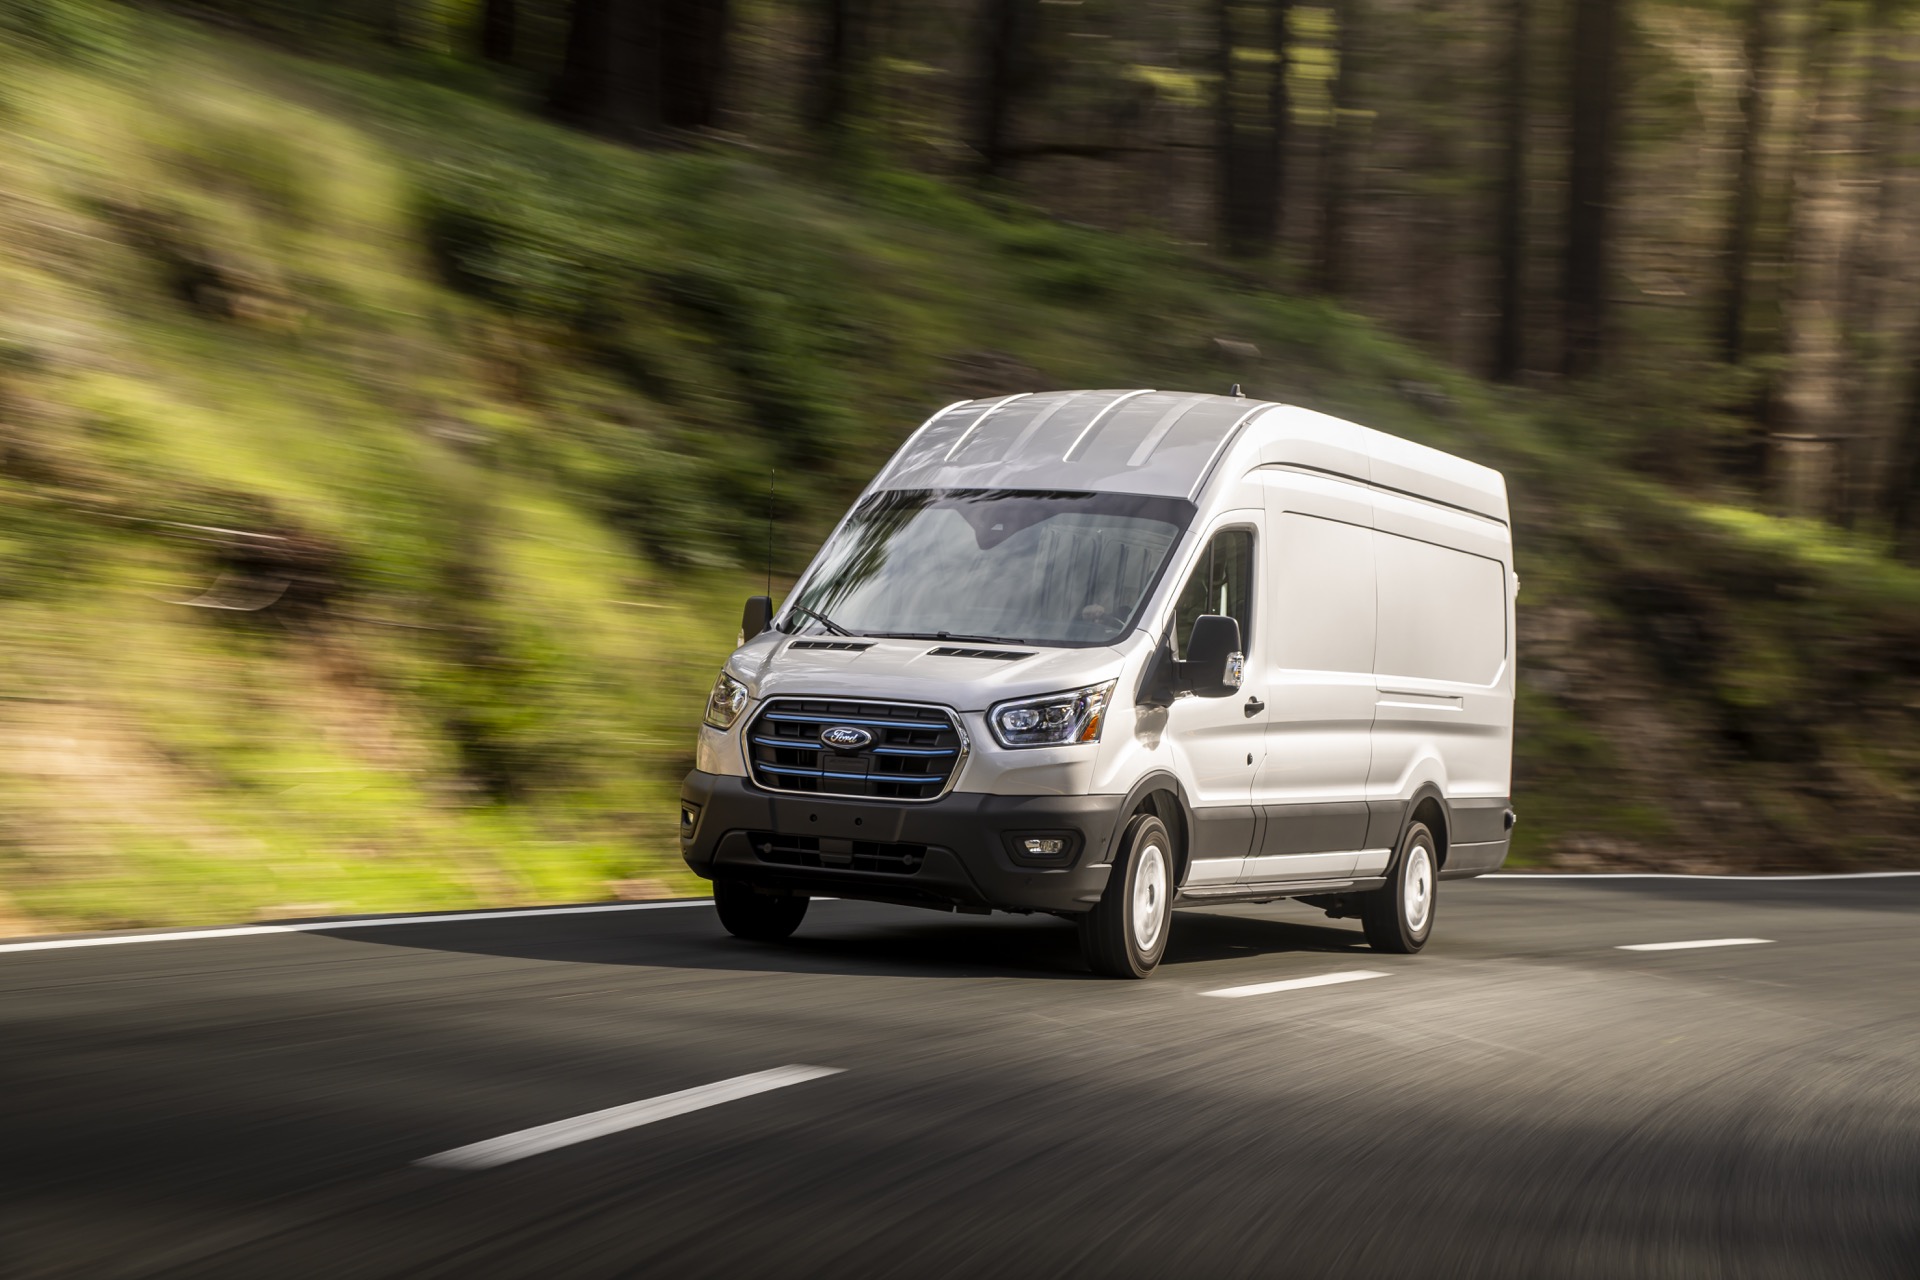 USPS buys 9,250 Ford E-Transit vans, with custom EVs years away